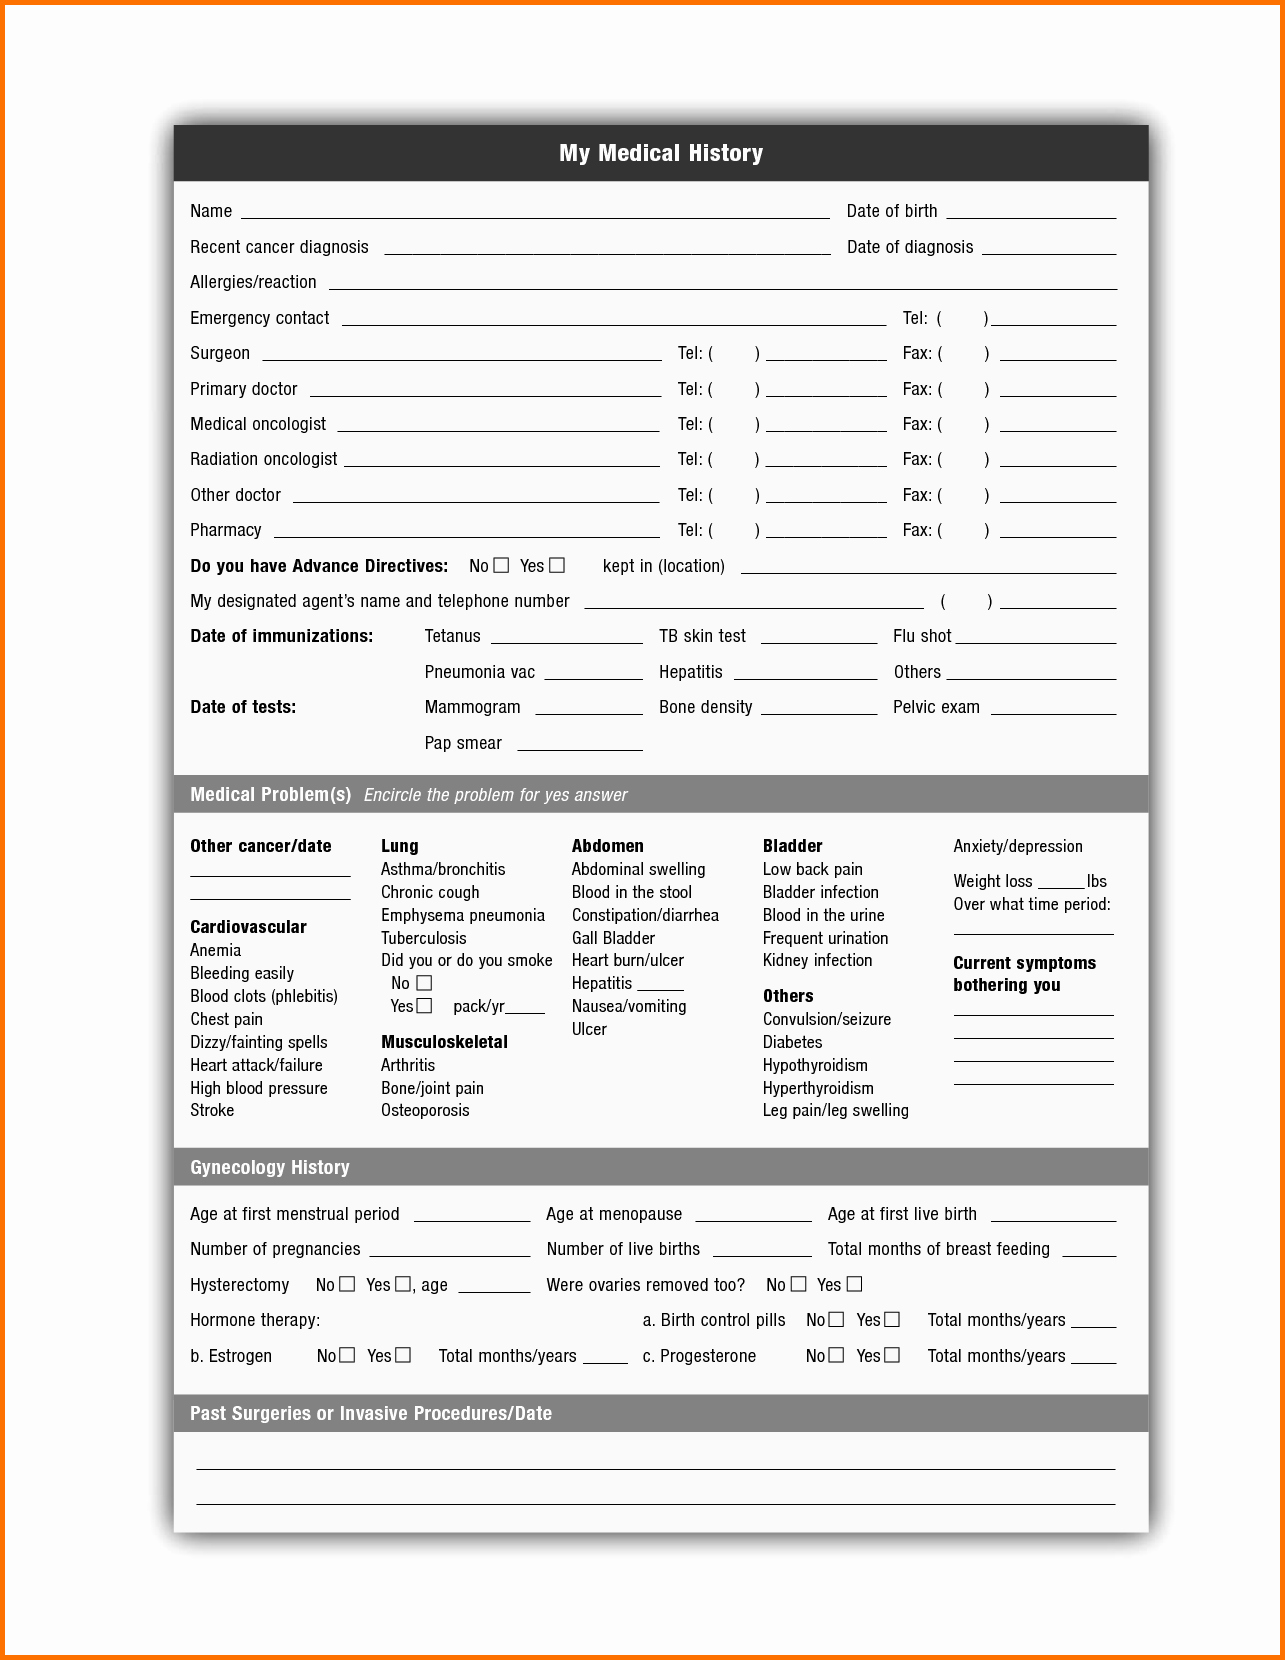 Blank Medical History form Printable New 14 Free Printable Medical forms Plantemplate Info History